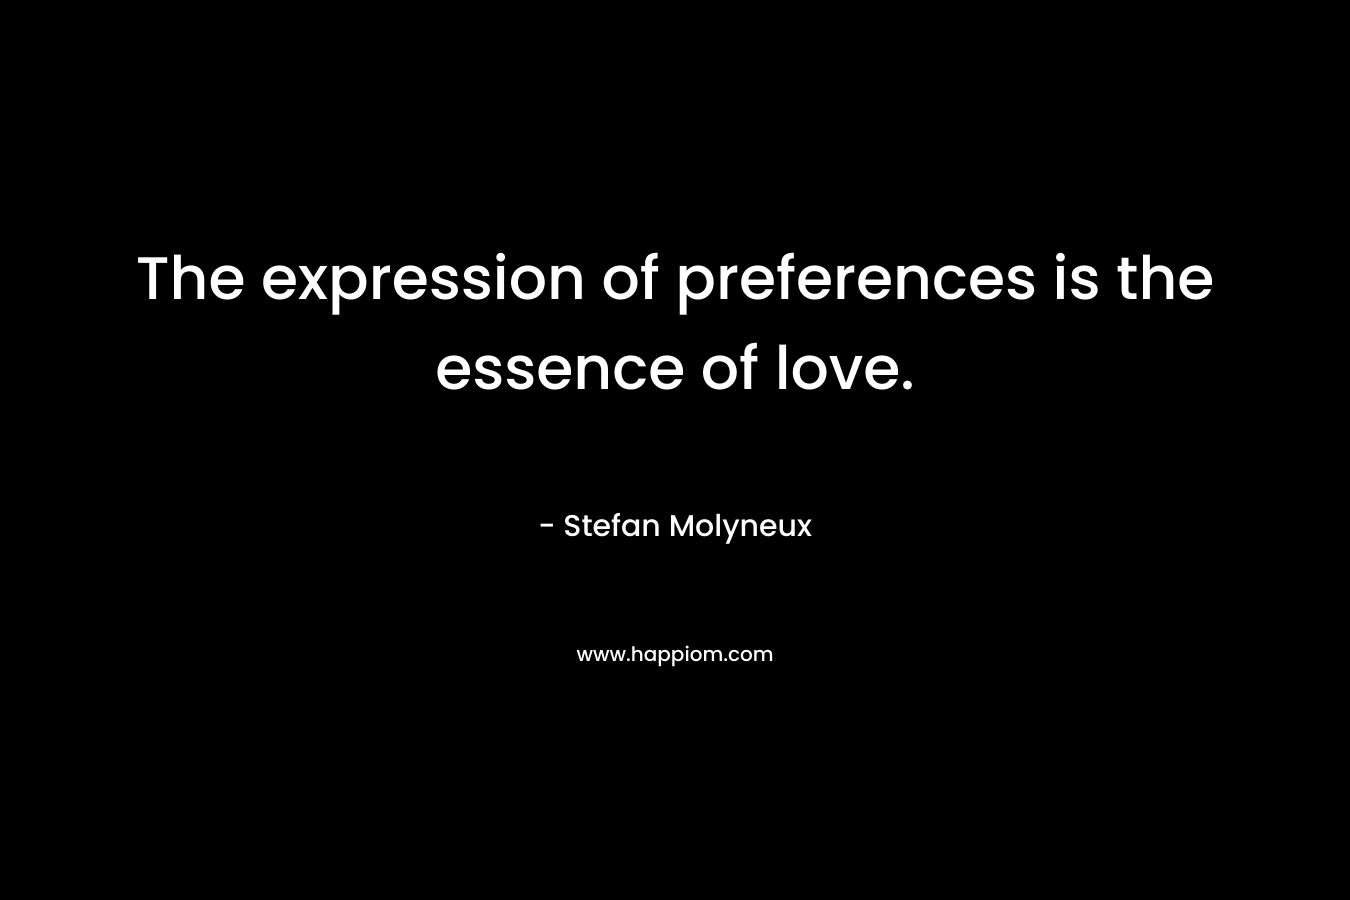 The expression of preferences is the essence of love. – Stefan Molyneux